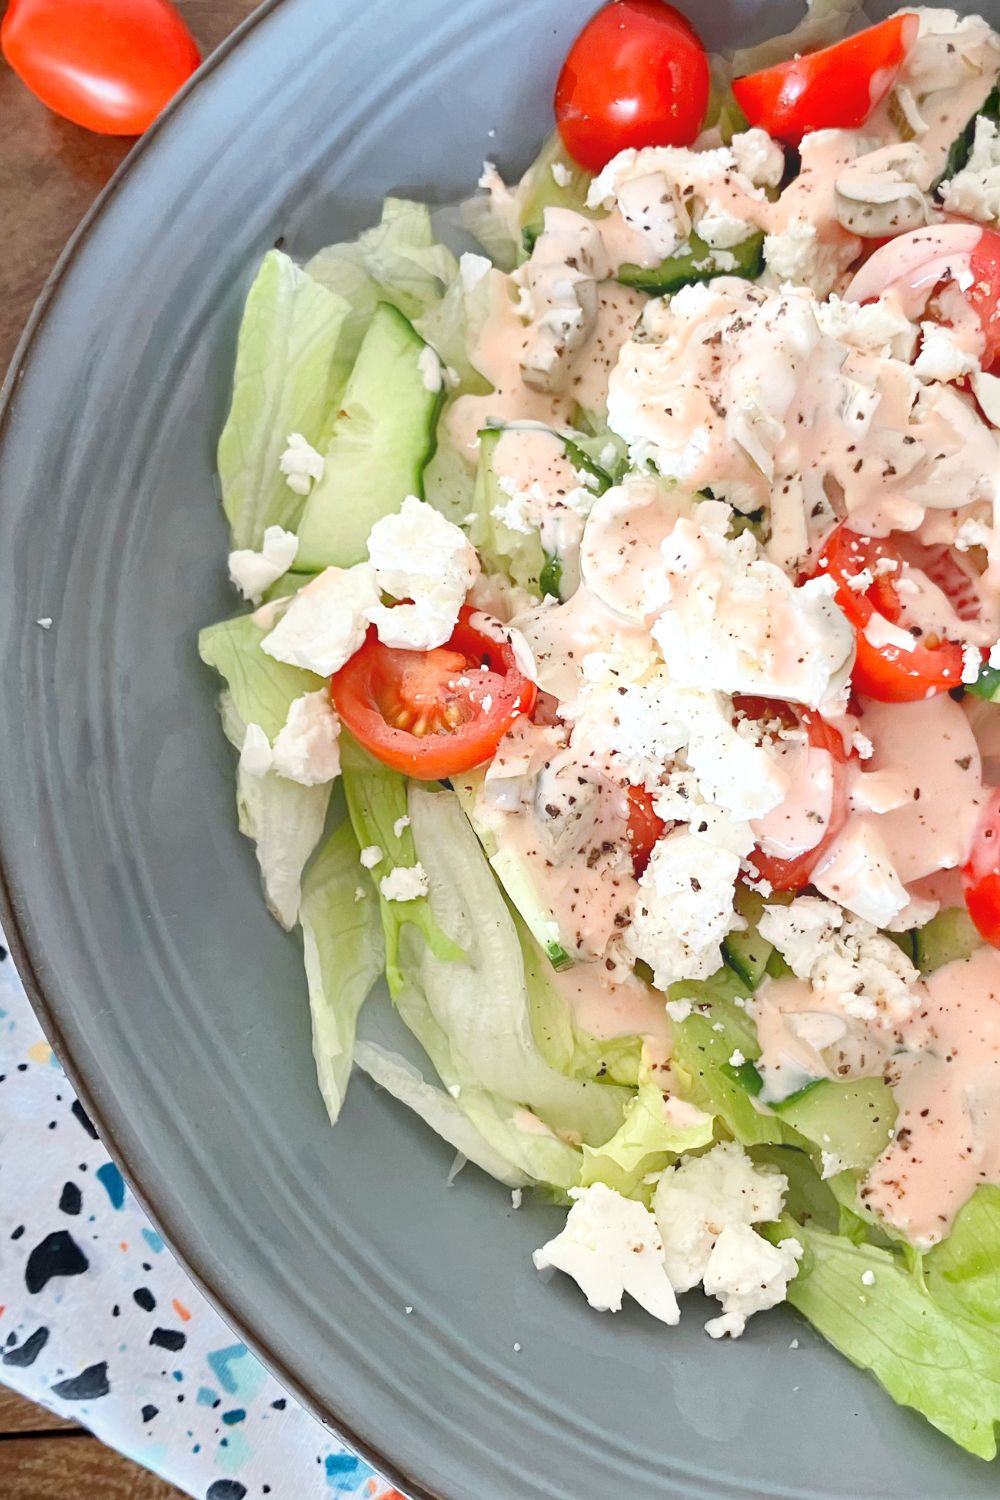 Simple Feta Cheese Salad with a Marie Rose Dressing